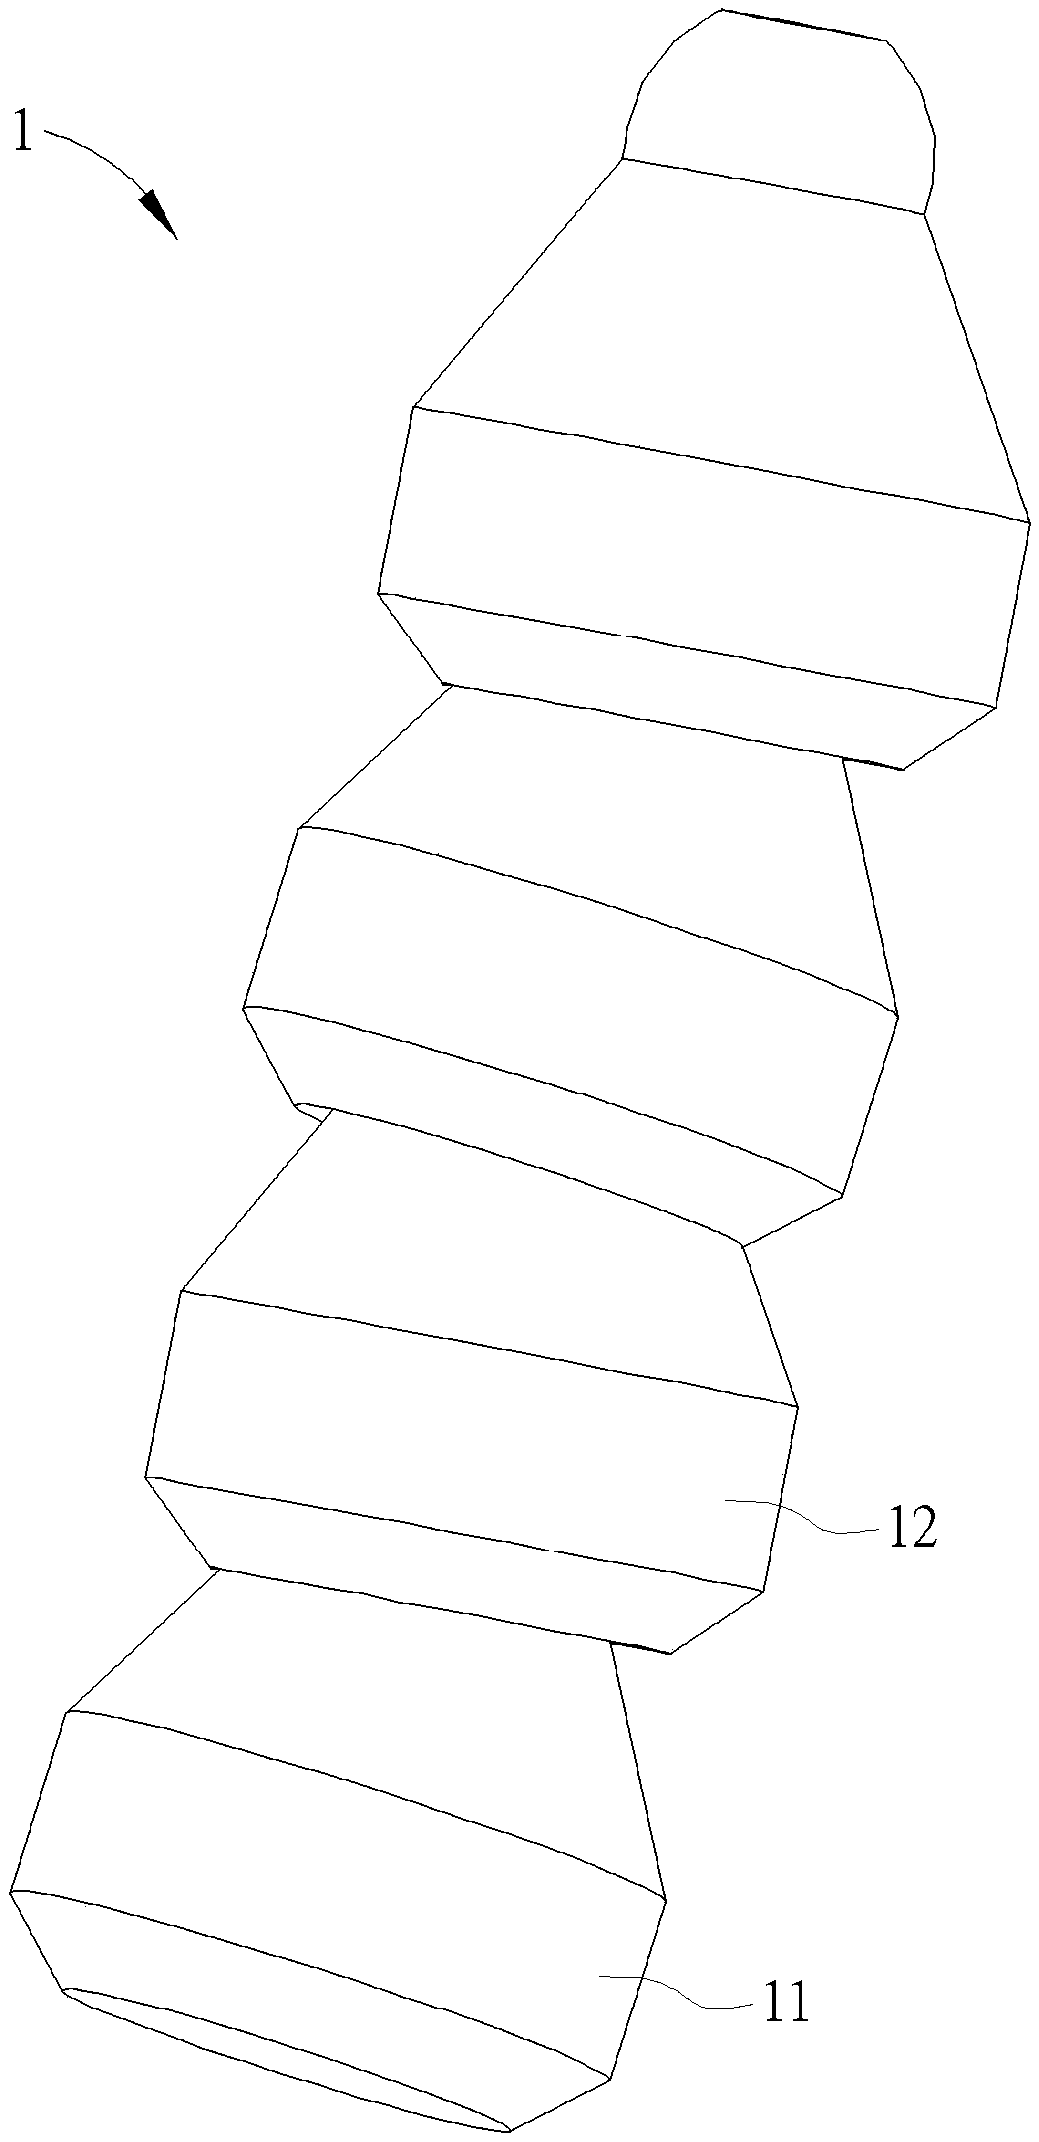 Tubing structure